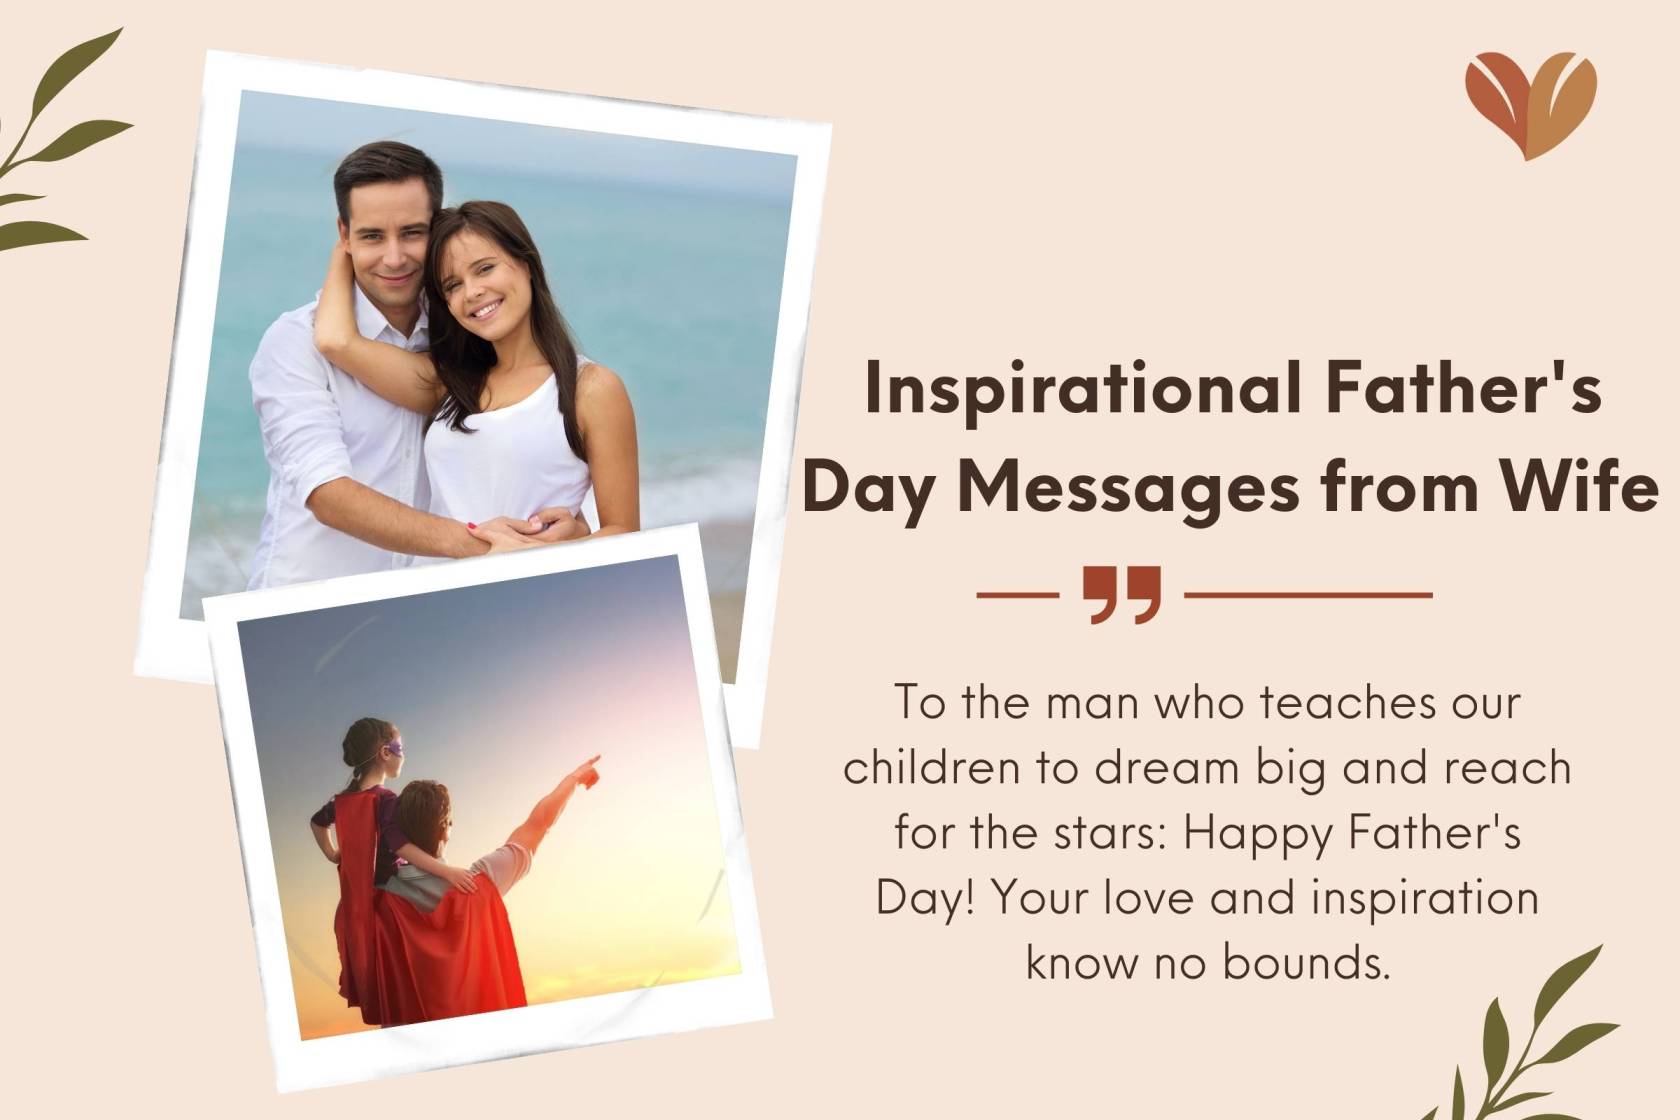 Inspirational Father's Day Messages from Wife